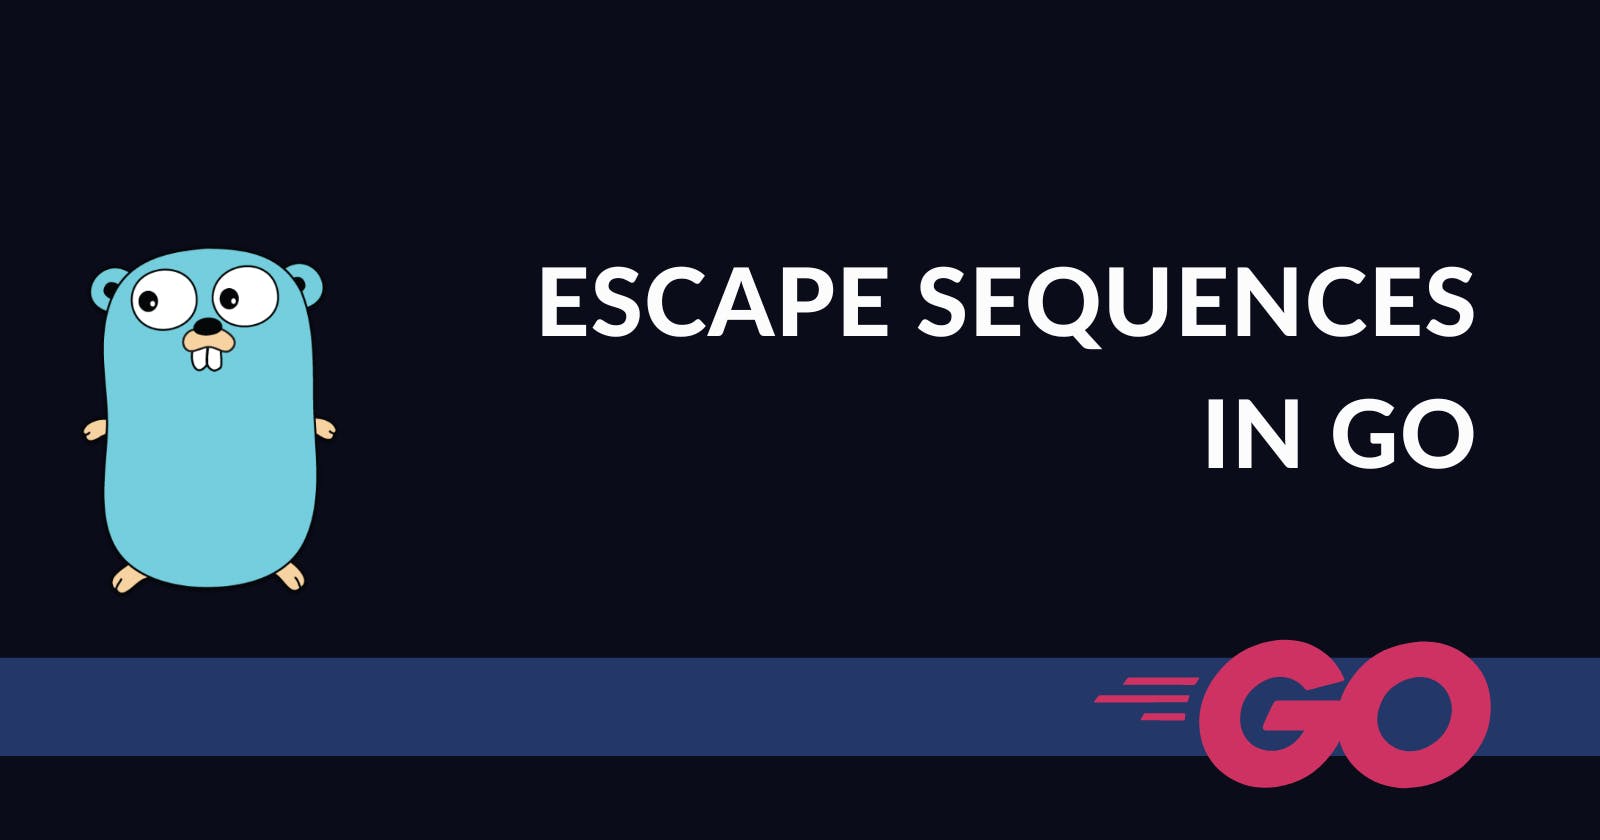 Escape Sequences in Go (Blog 5 of the Go Series)